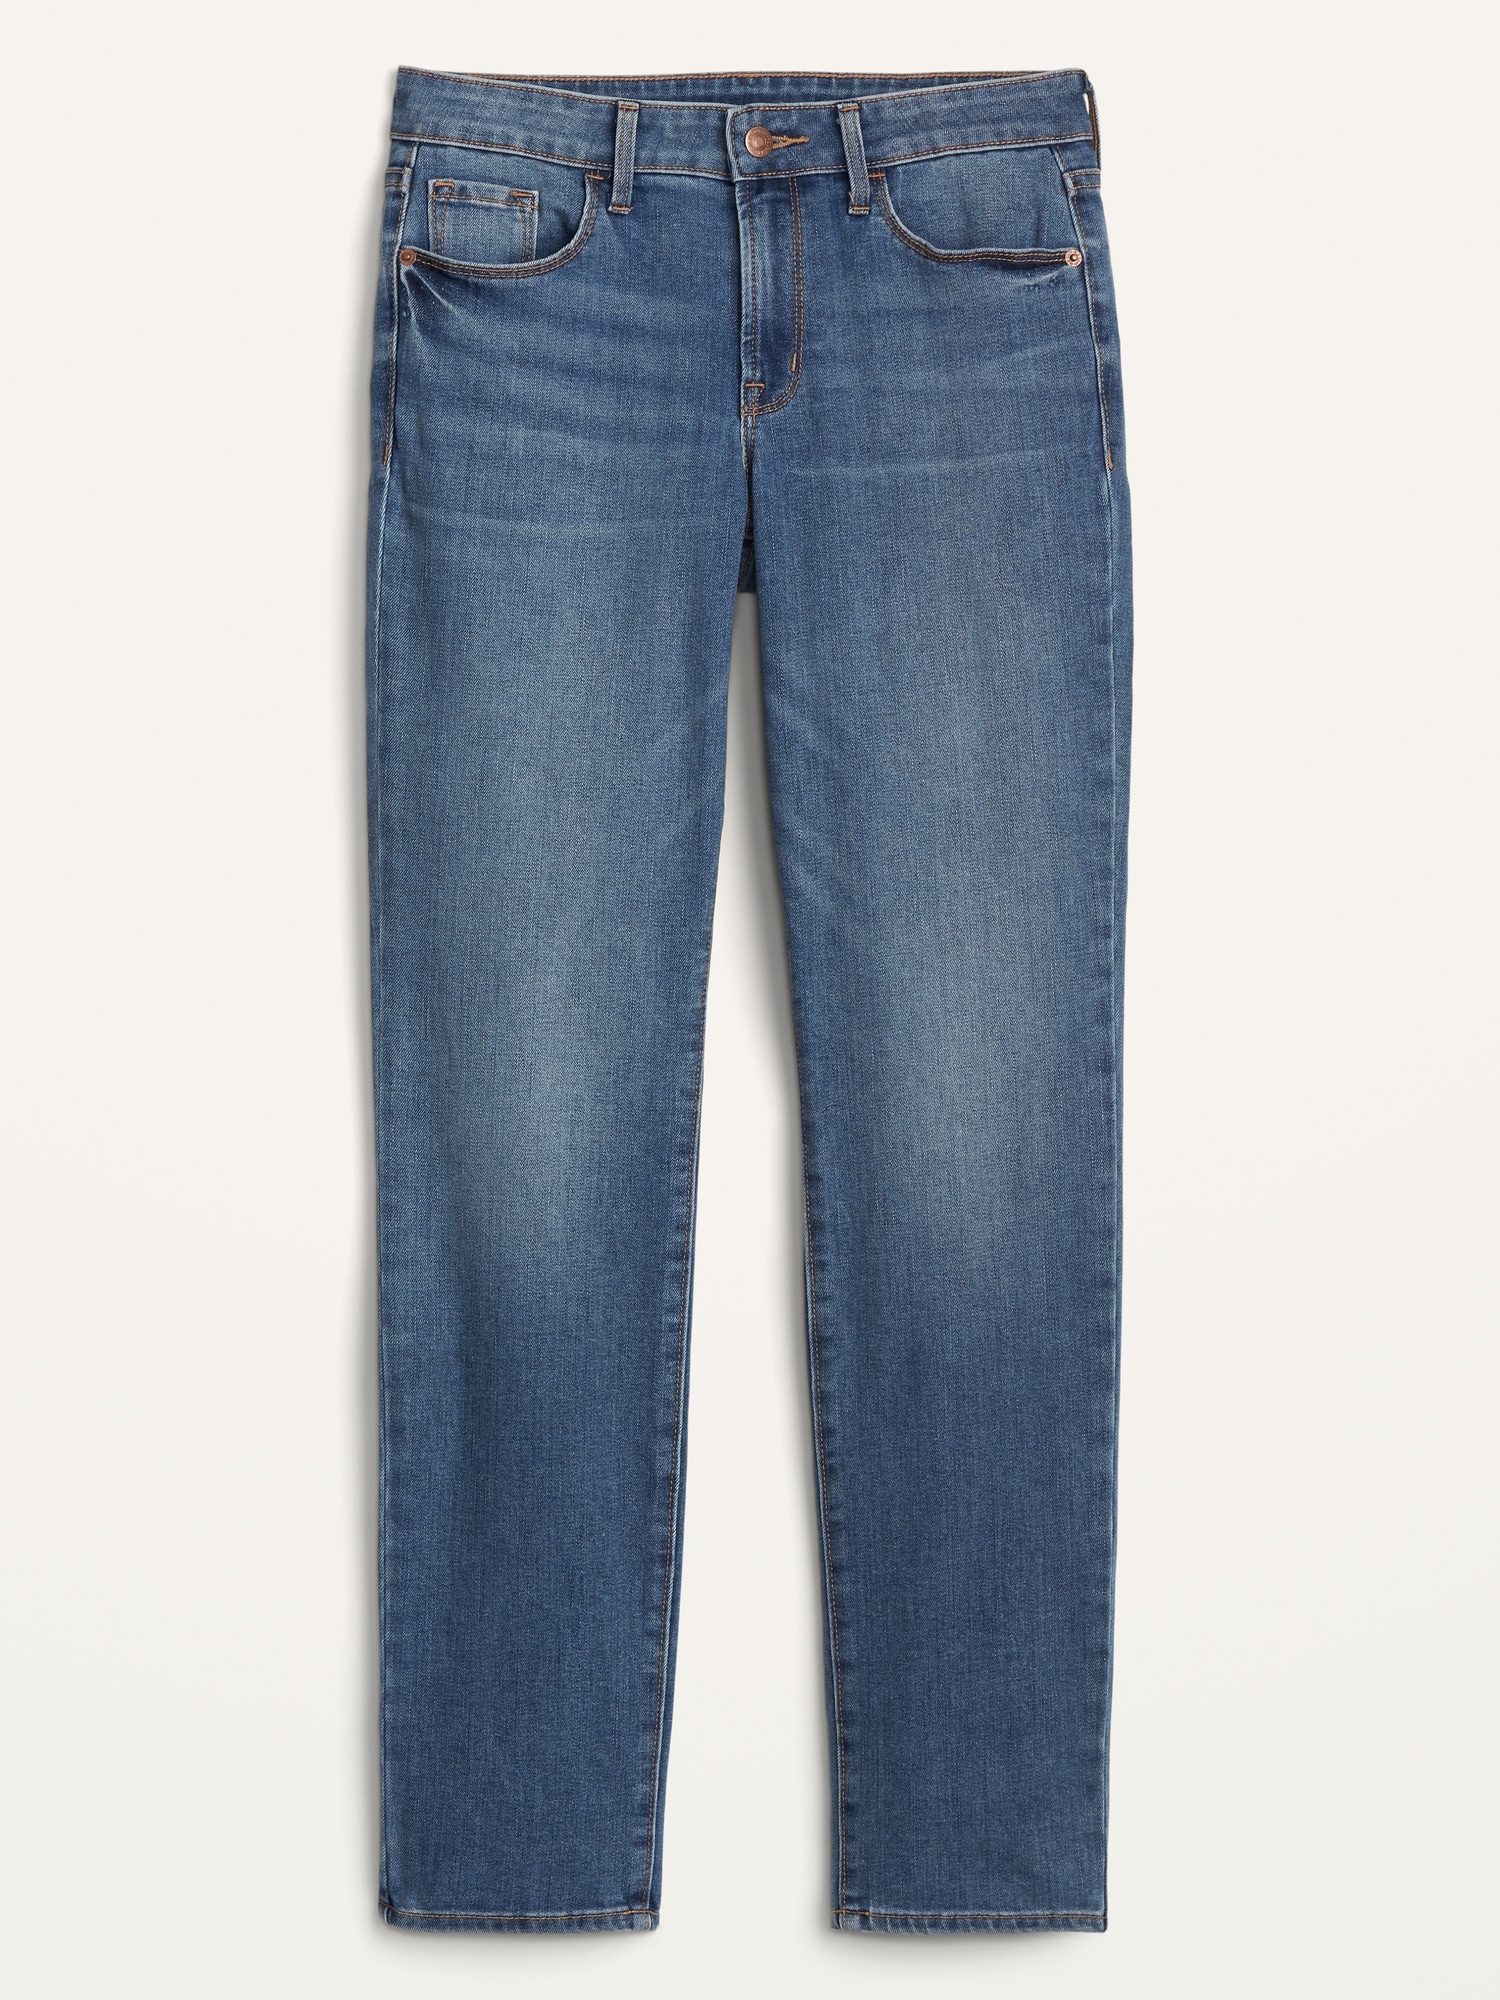 Old Navy Women's Mid-Rise Power Slim Straight Jeans